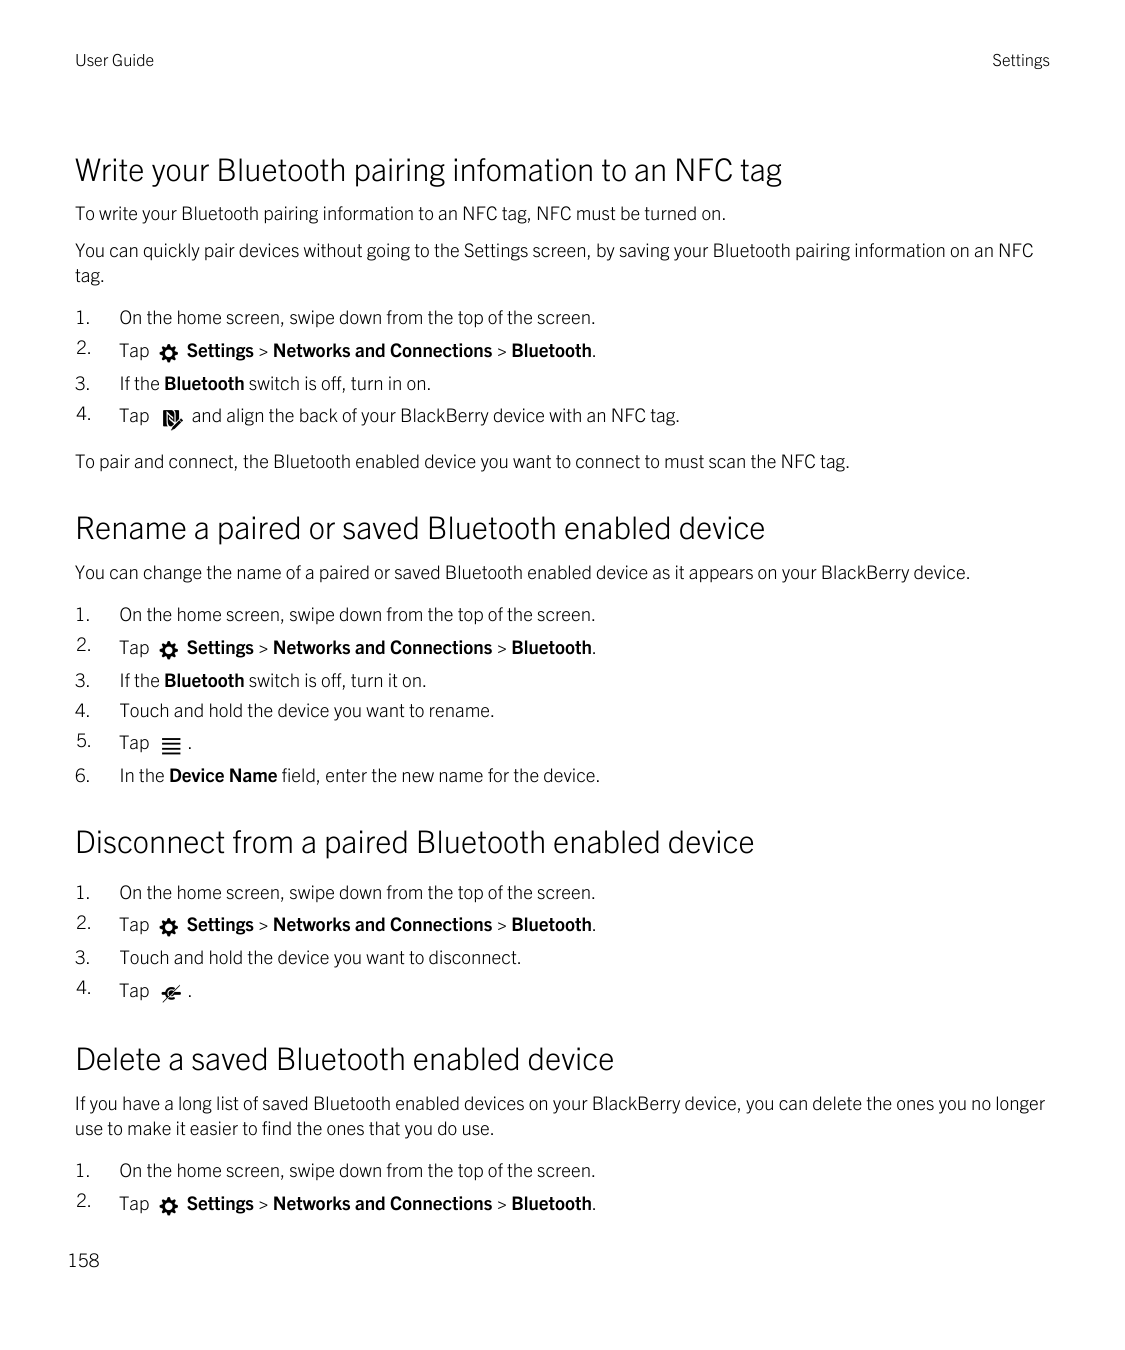 User GuideSettingsWrite your Bluetooth pairing infomation to an NFC tagTo write your Bluetooth pairing information to an NFC tag